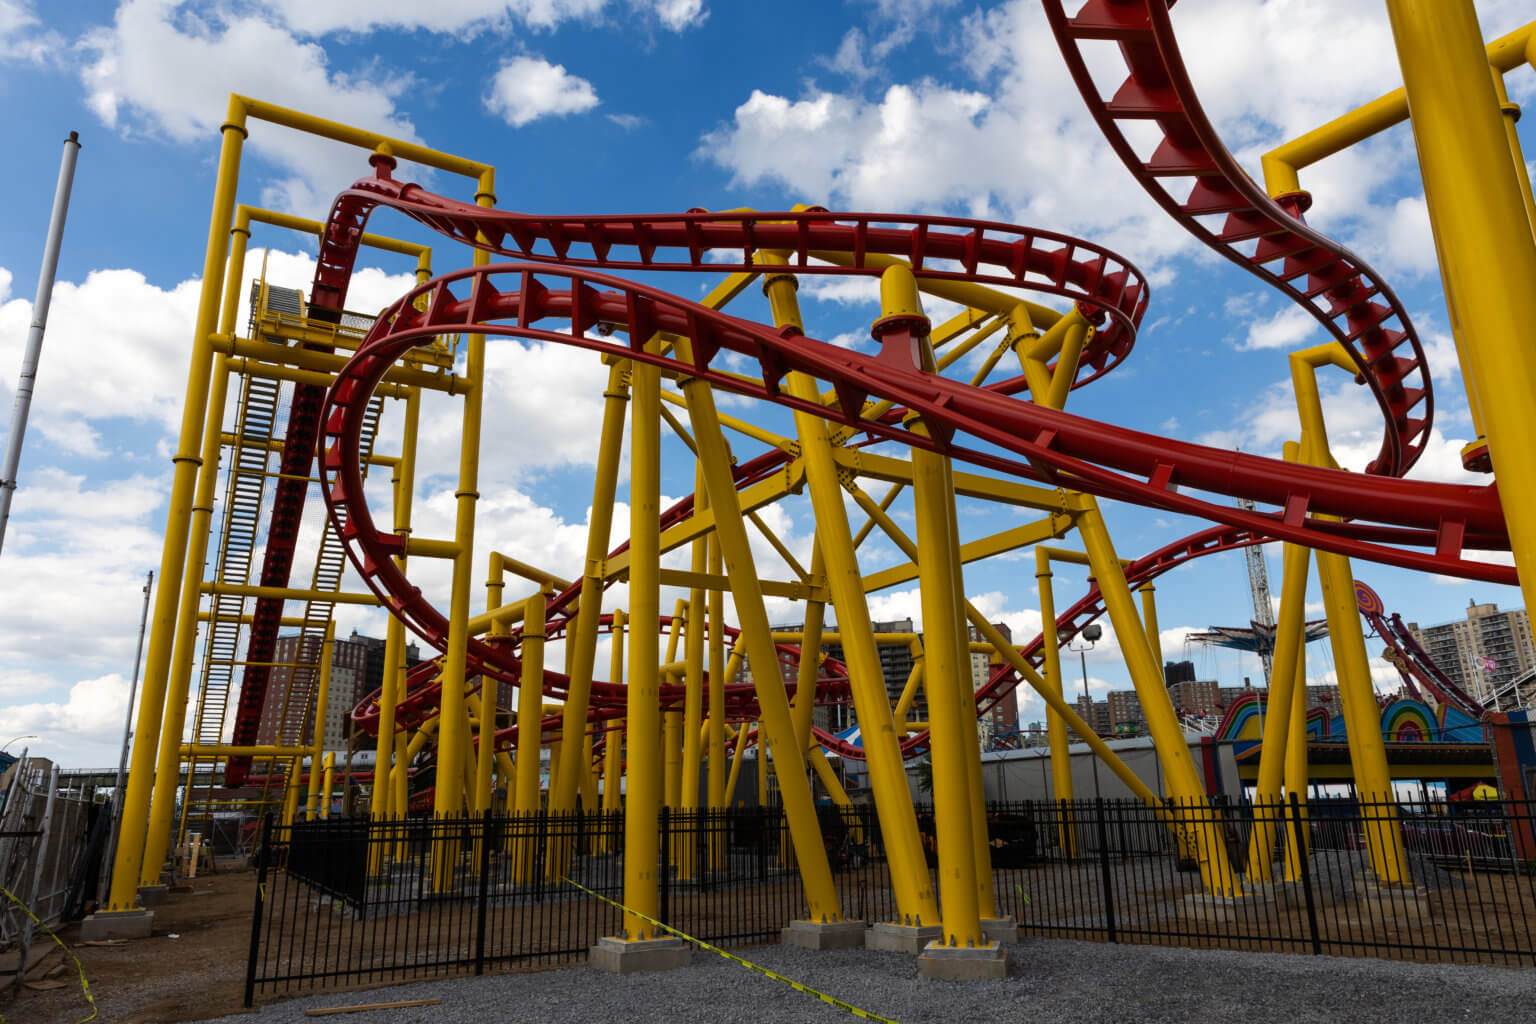 Coney Island’s newest roller coaster, The Phoenix, to open soon